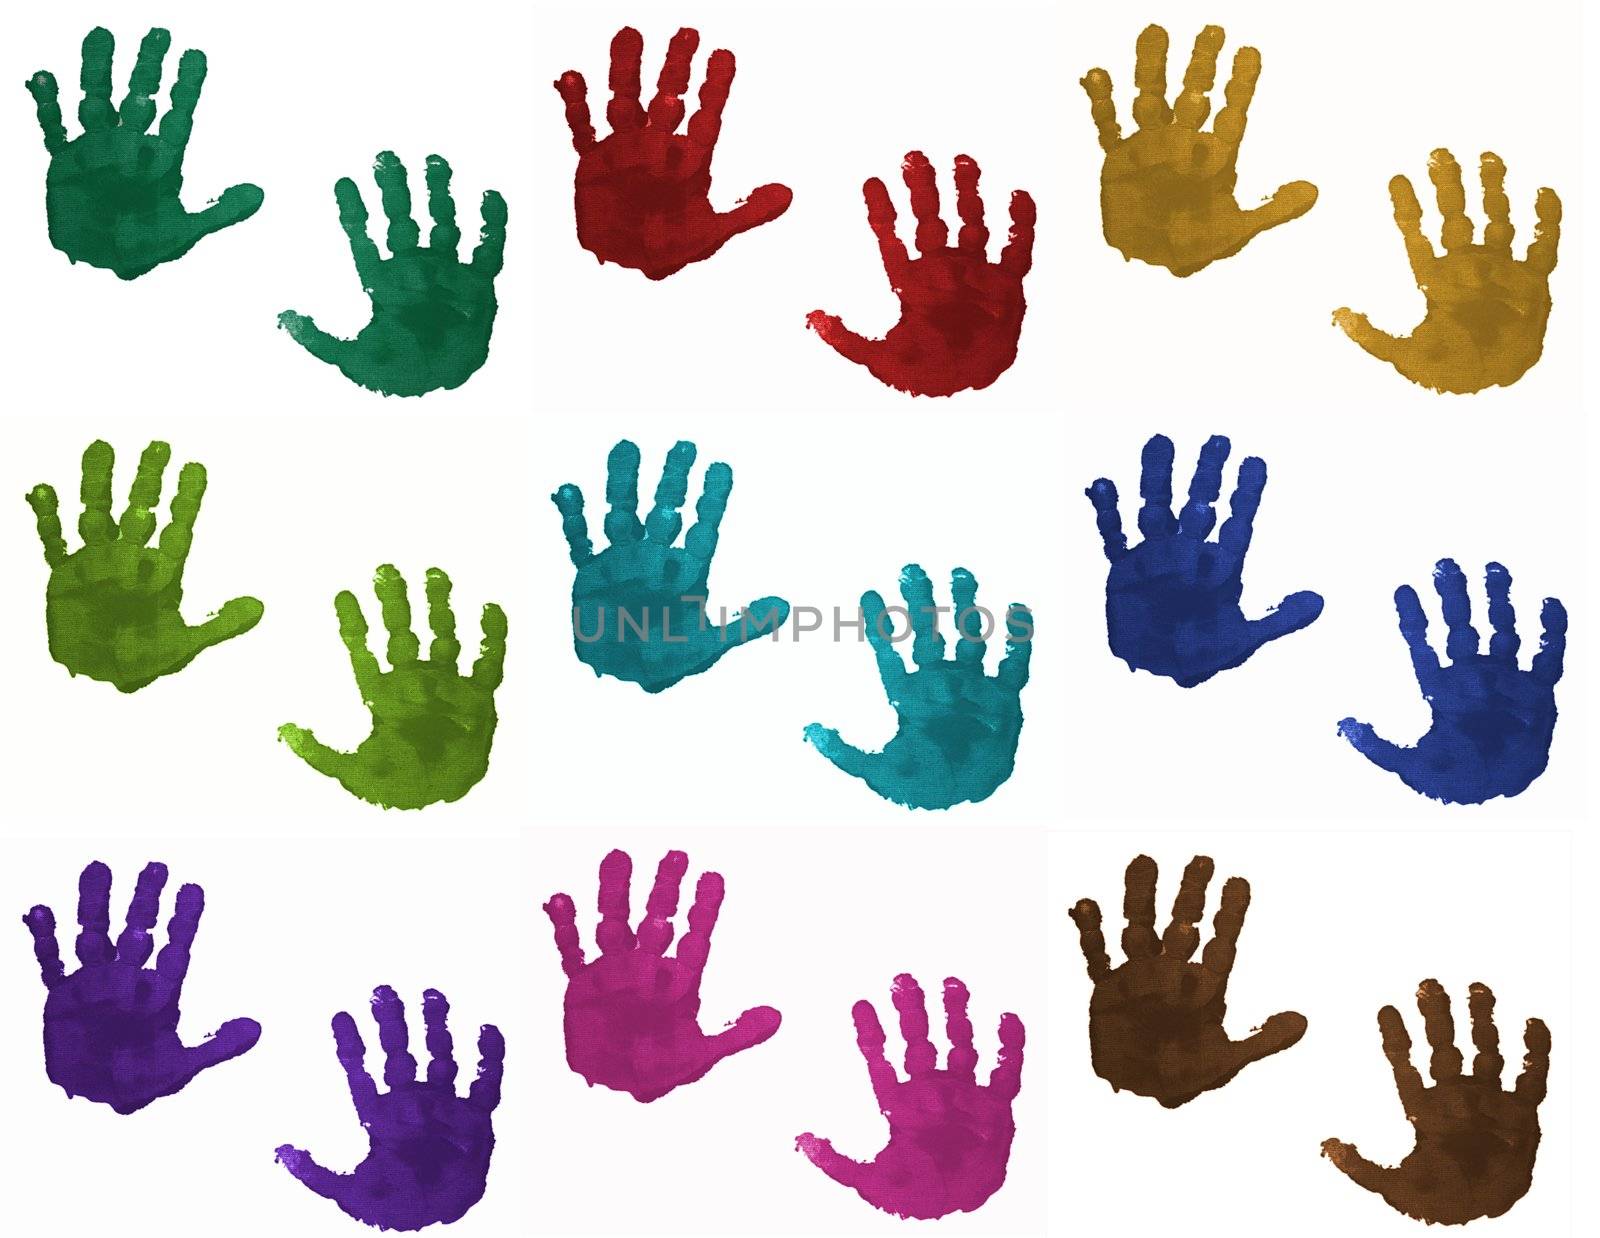 Colorful children's hands by sundaune